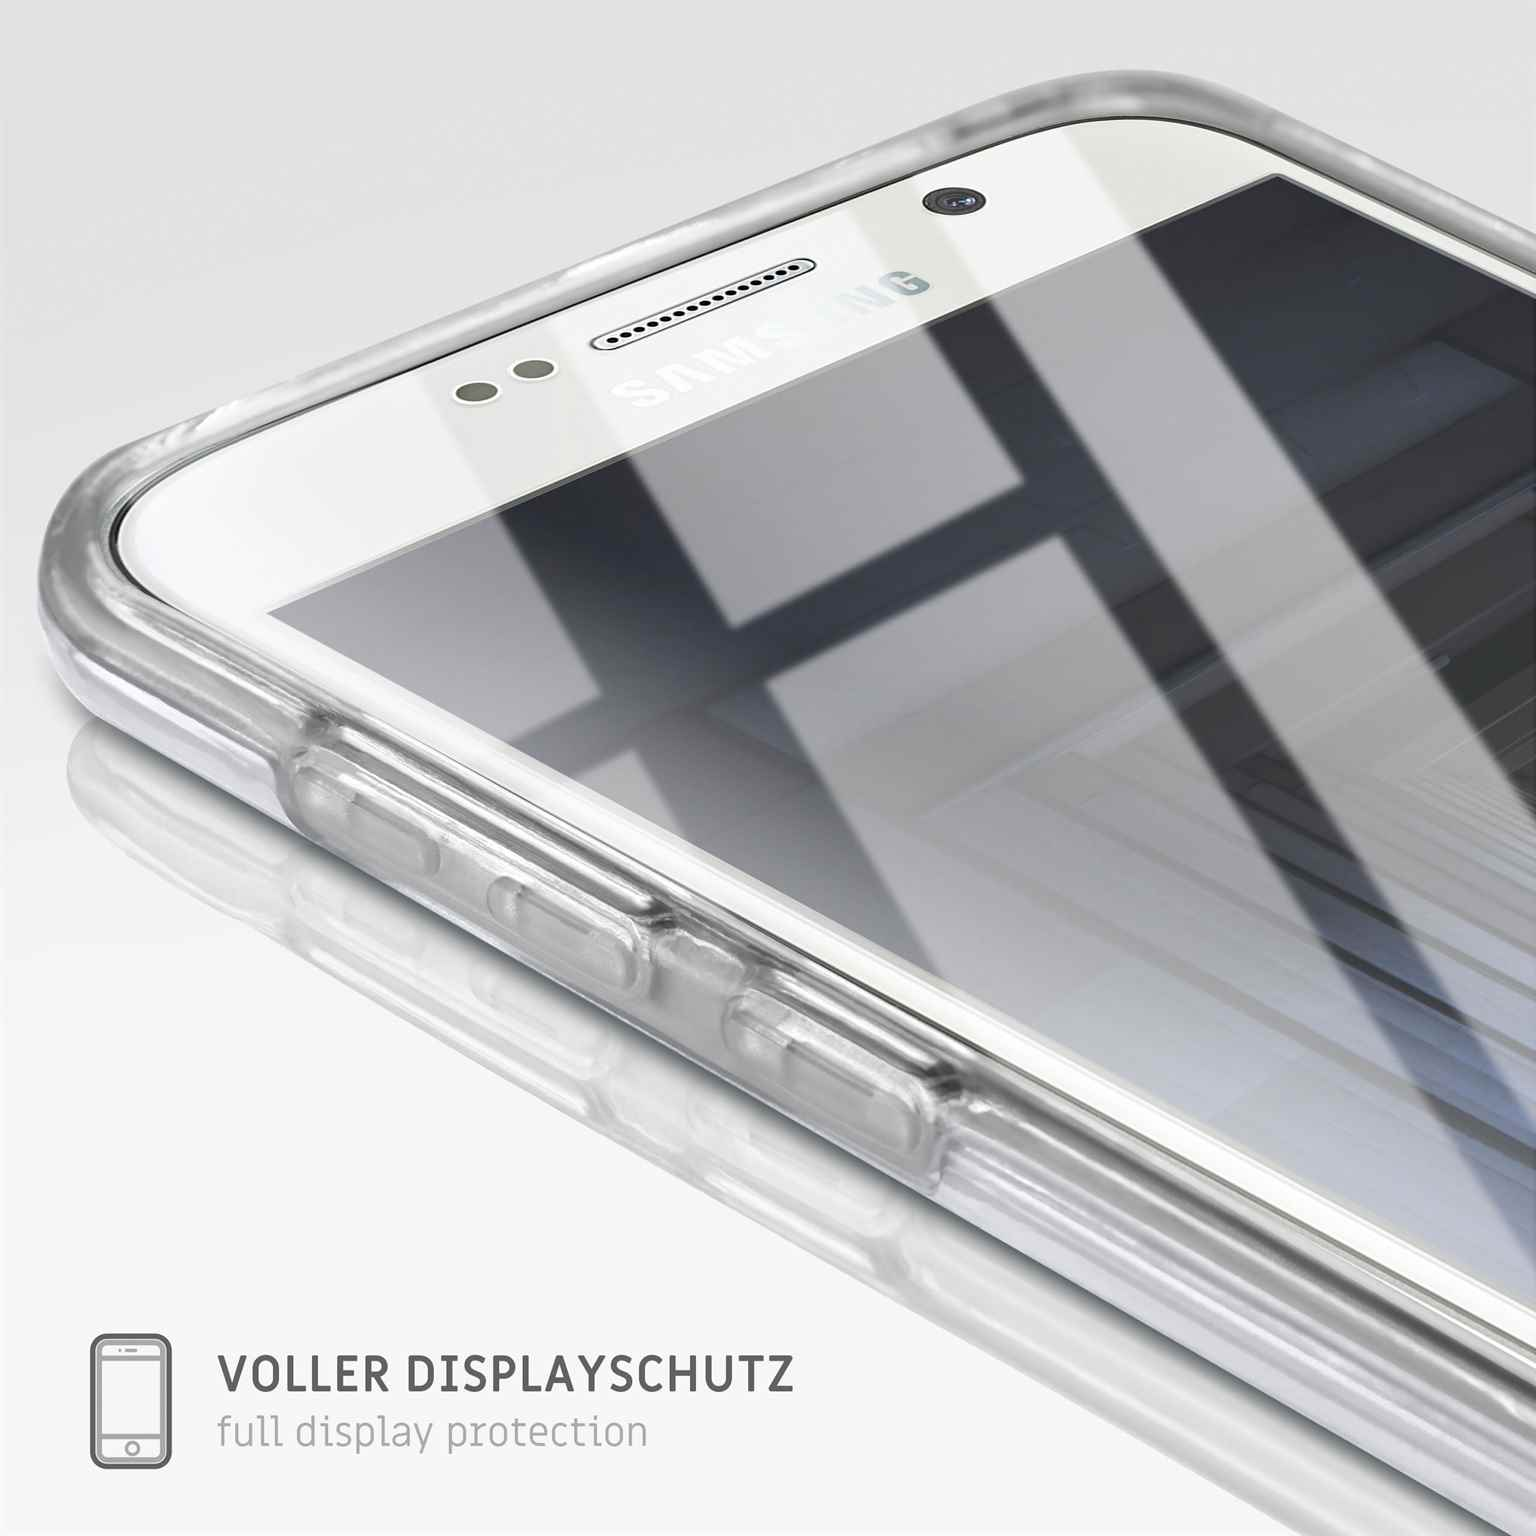 Case, Cover, Full Ultra-Clear Touch S6, Samsung, Galaxy ONEFLOW